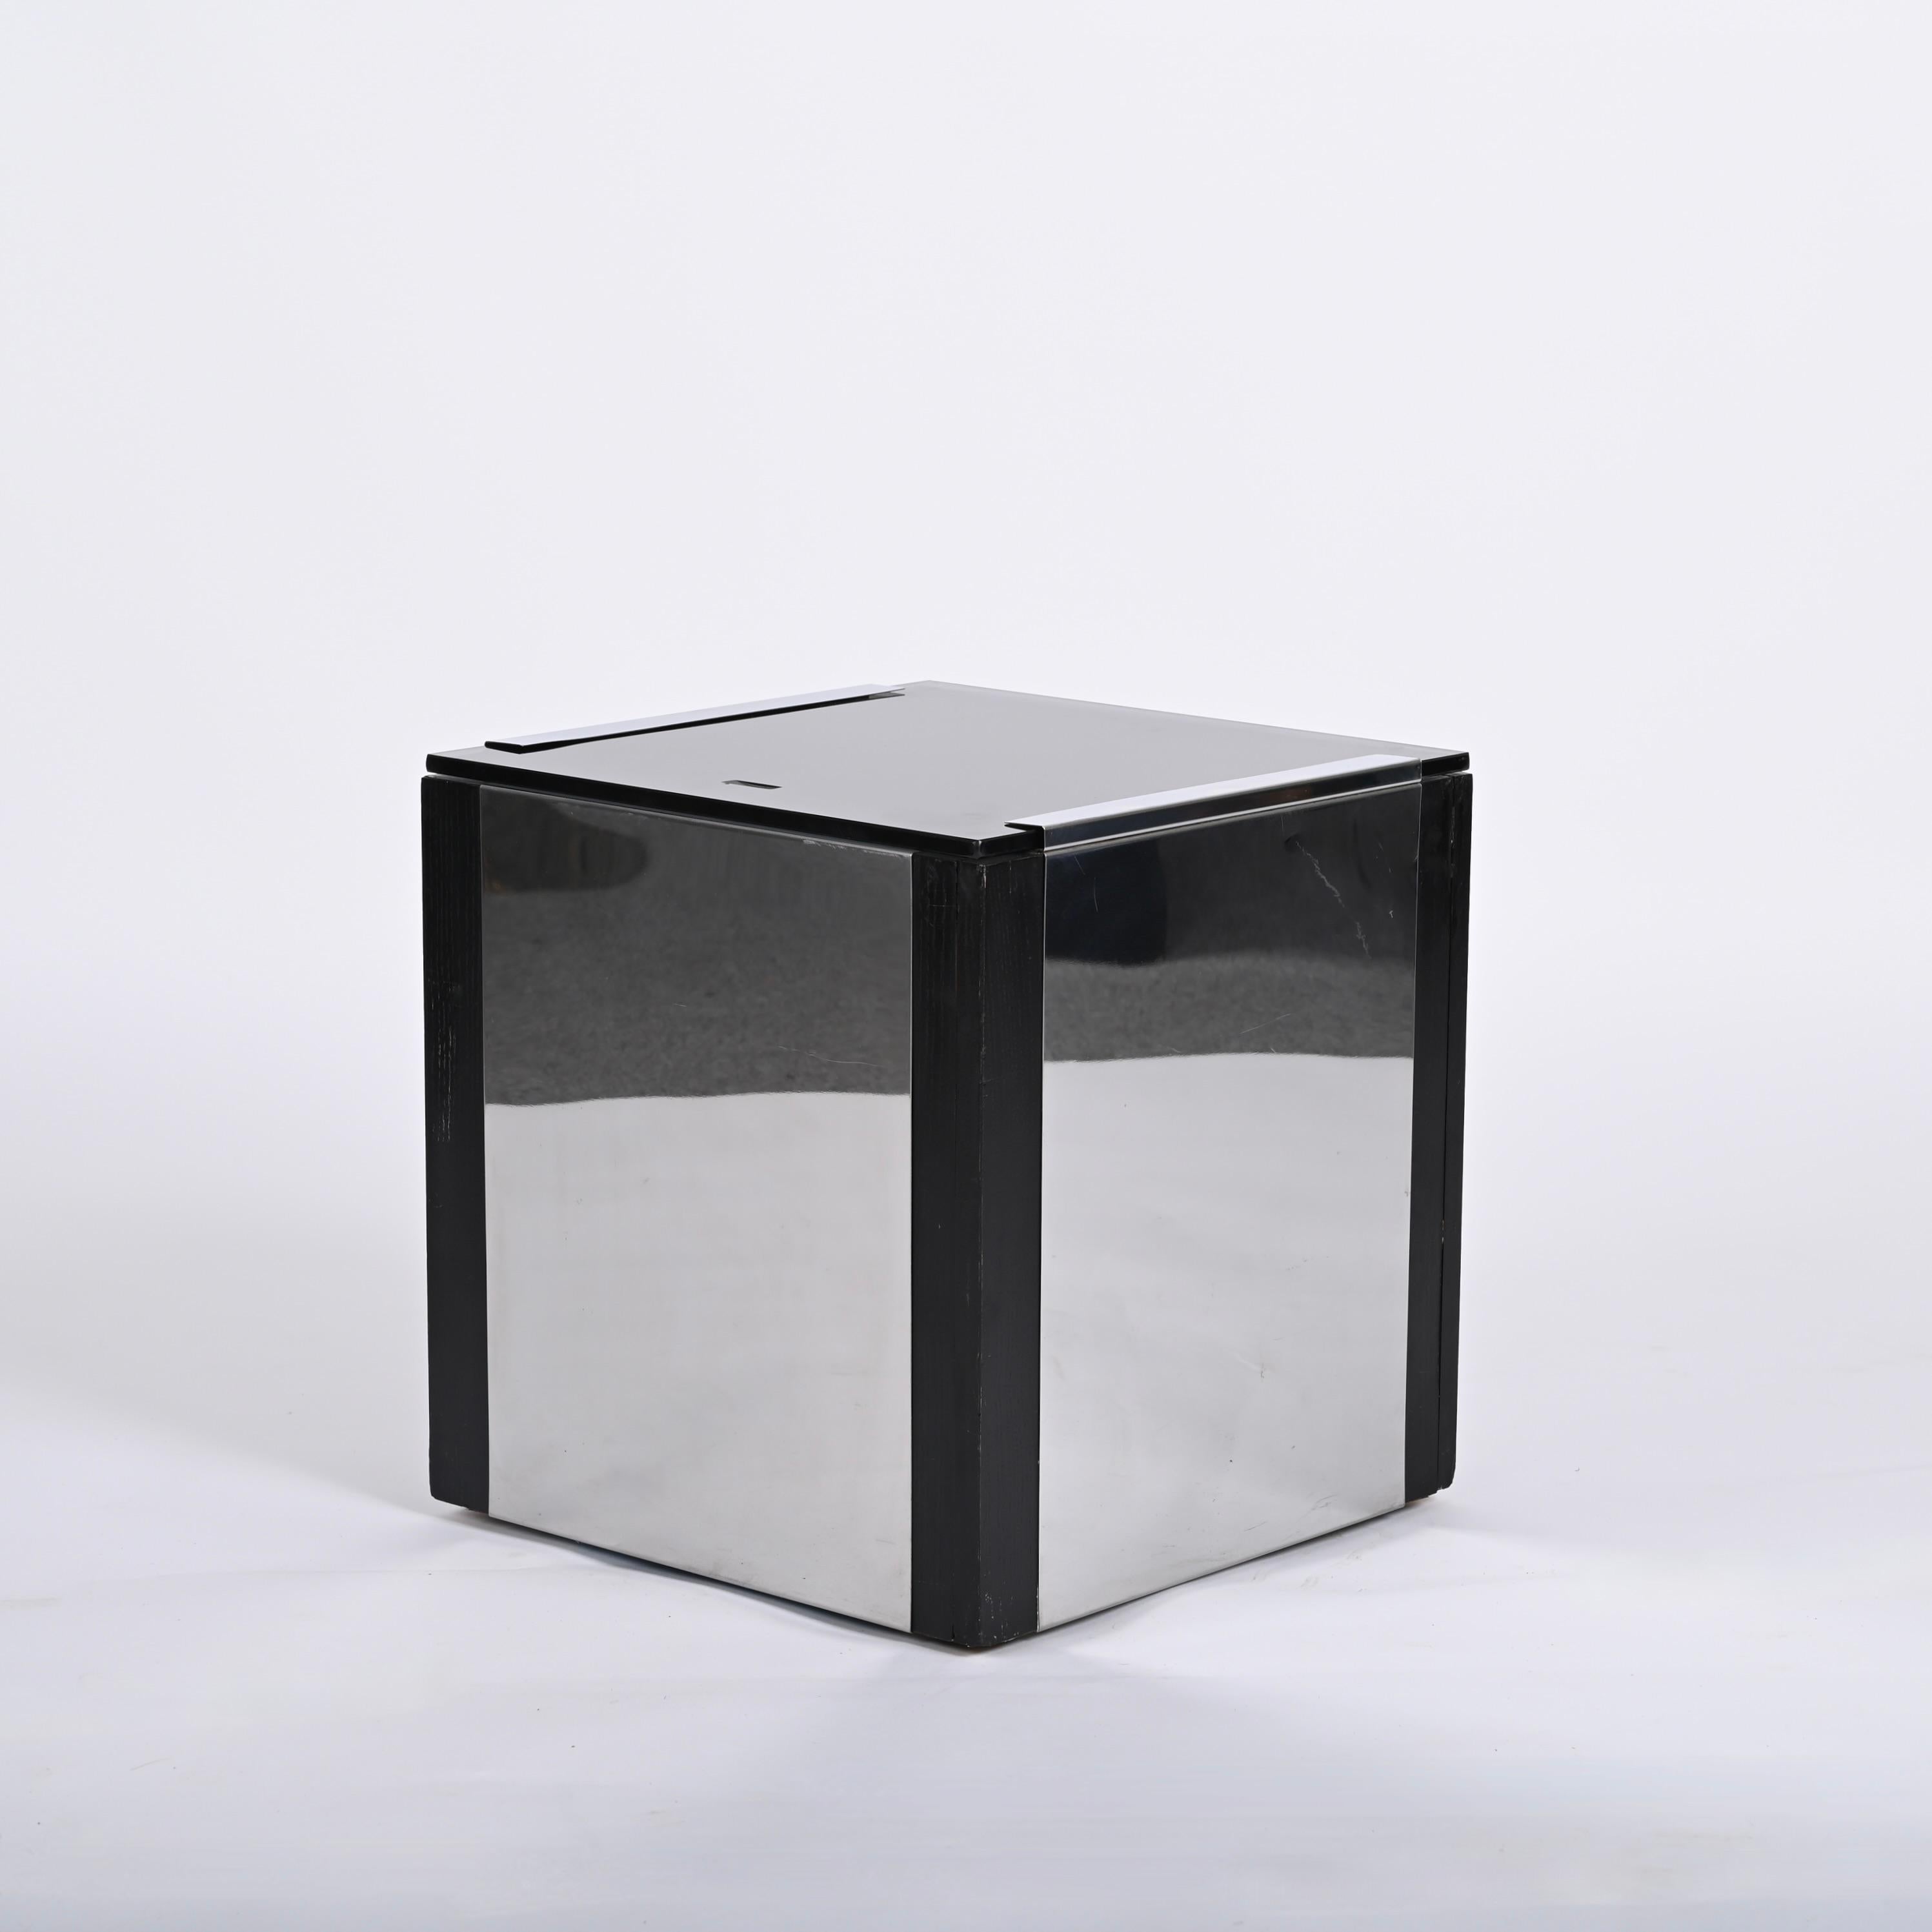 Willy Rizzo Midcentury Cubic Chromed Steel, Wood and Glass Dry Bar, Italy 1970s For Sale 5